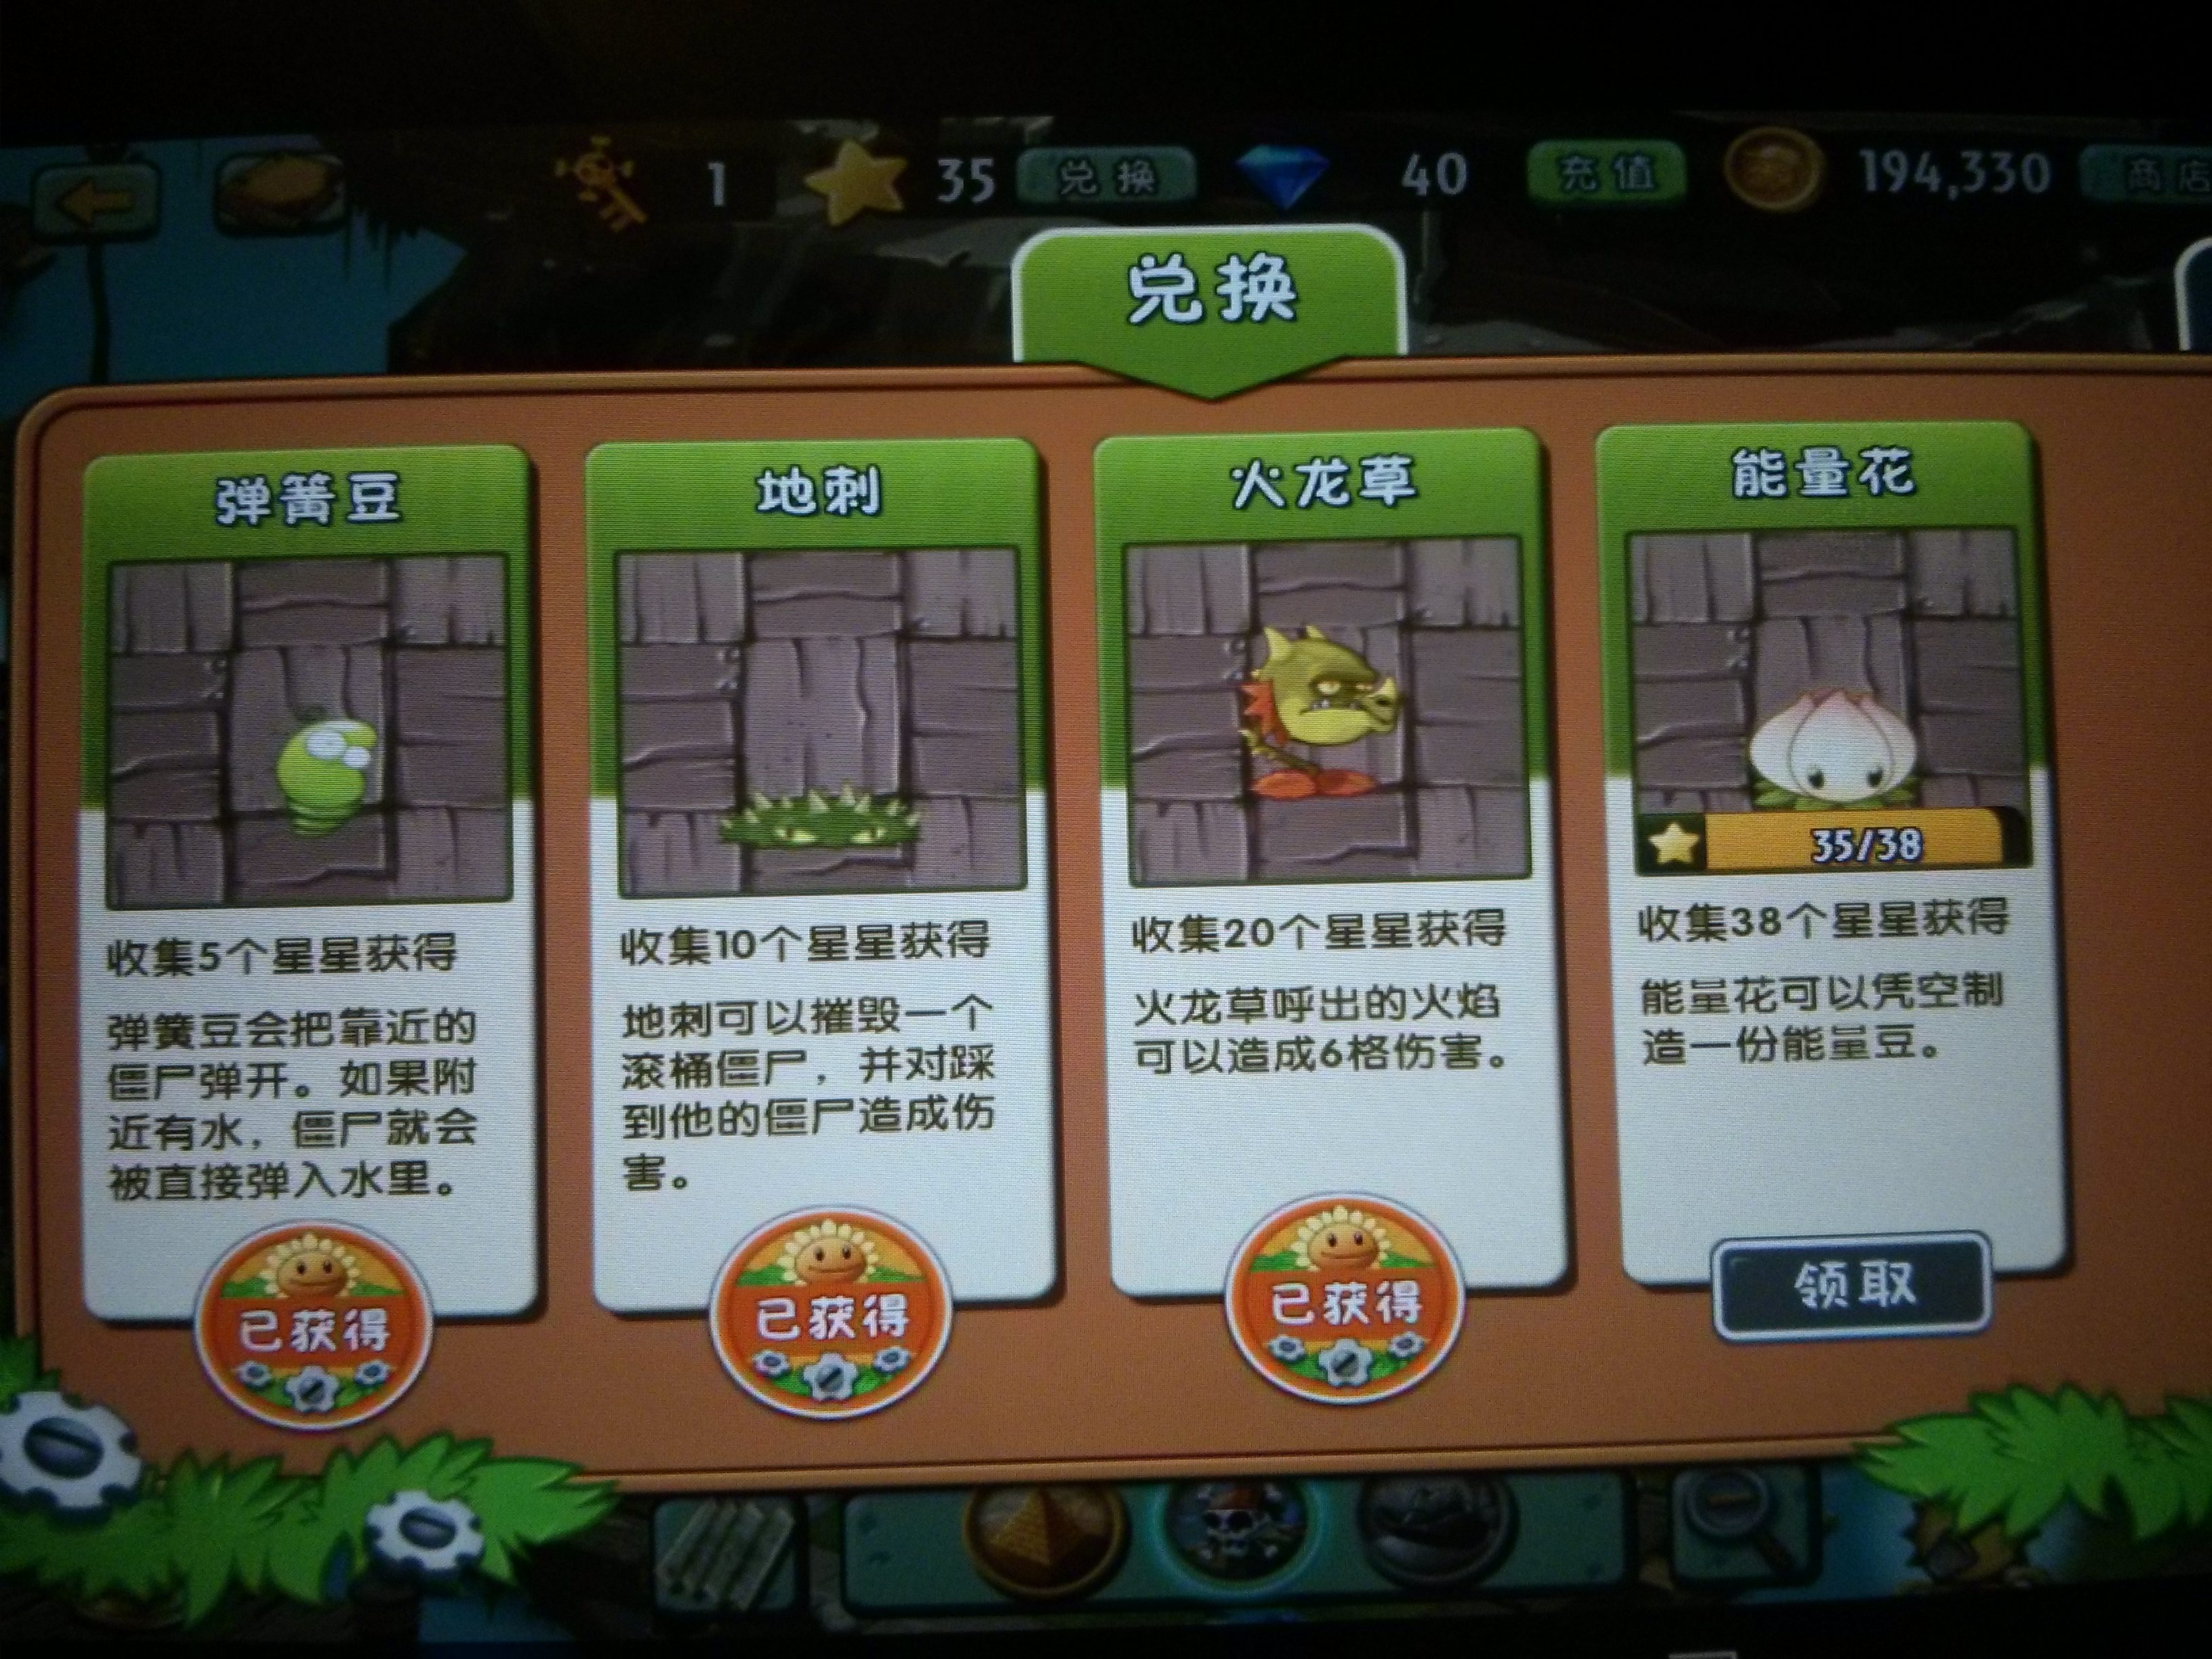 Plants vs Zombies 2: It's About Time – Android (China's APK